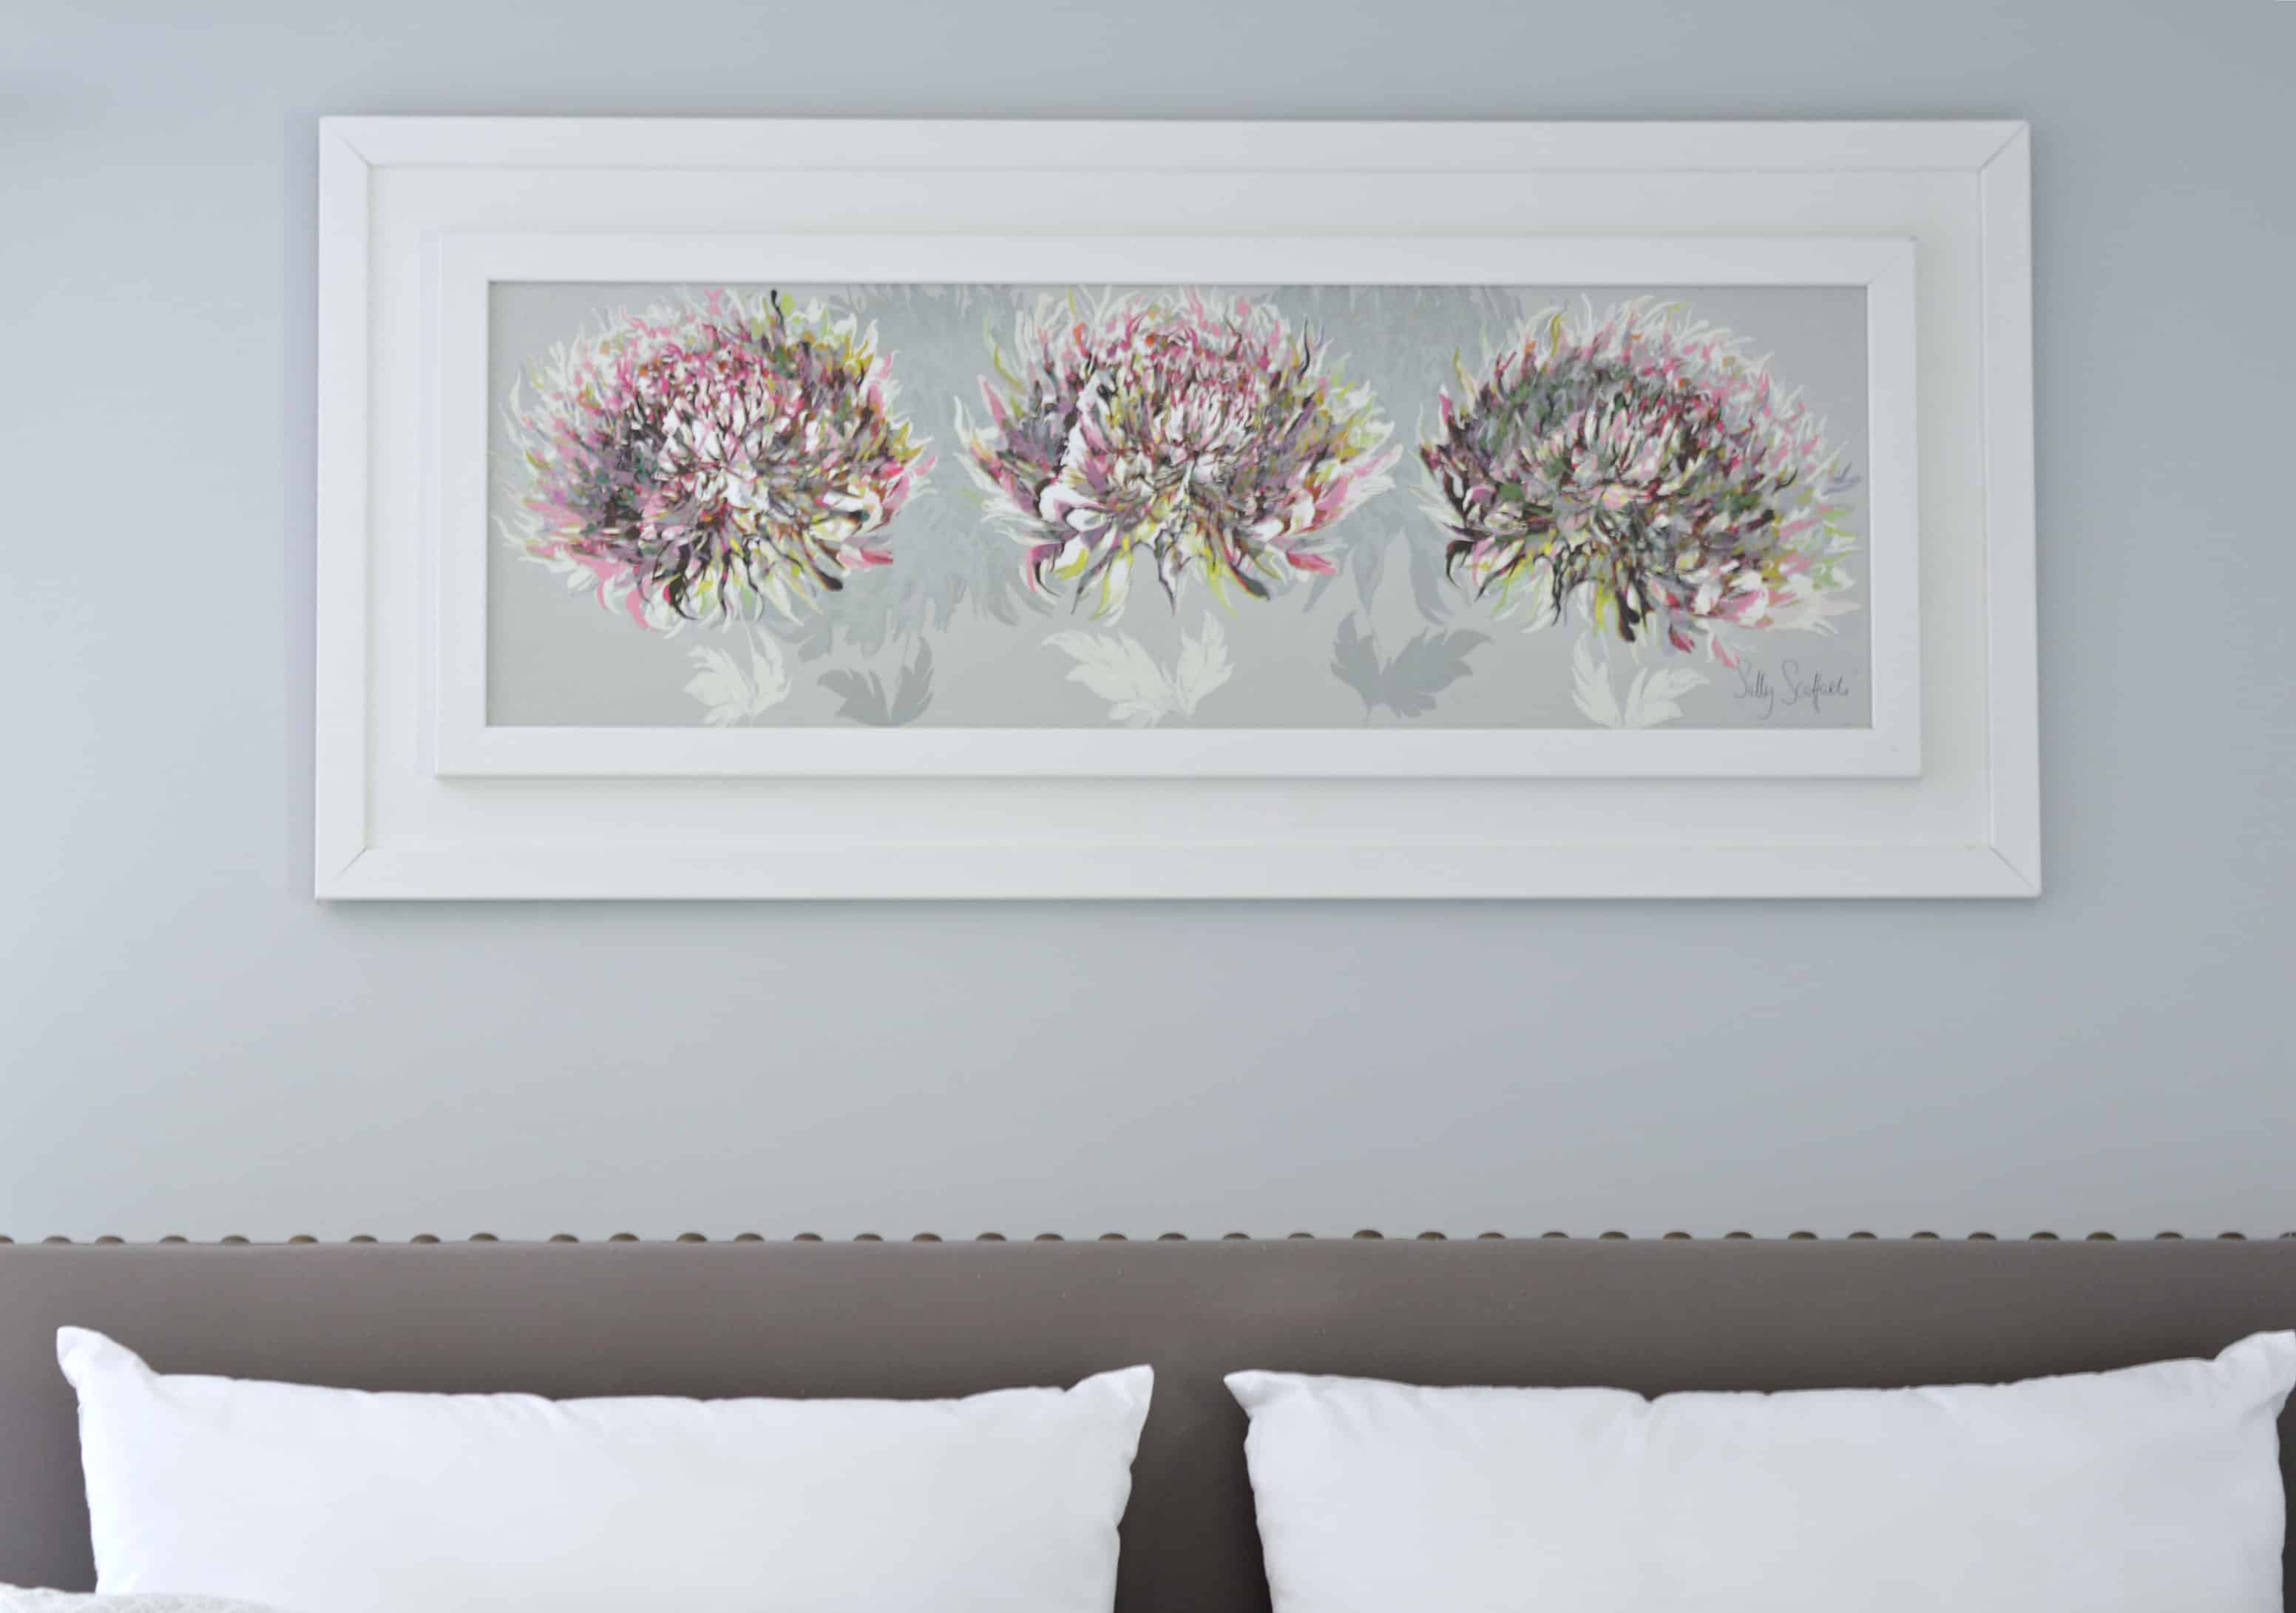 Close-up of floral frame - 3 large pink and white flowers in a white wooden frame